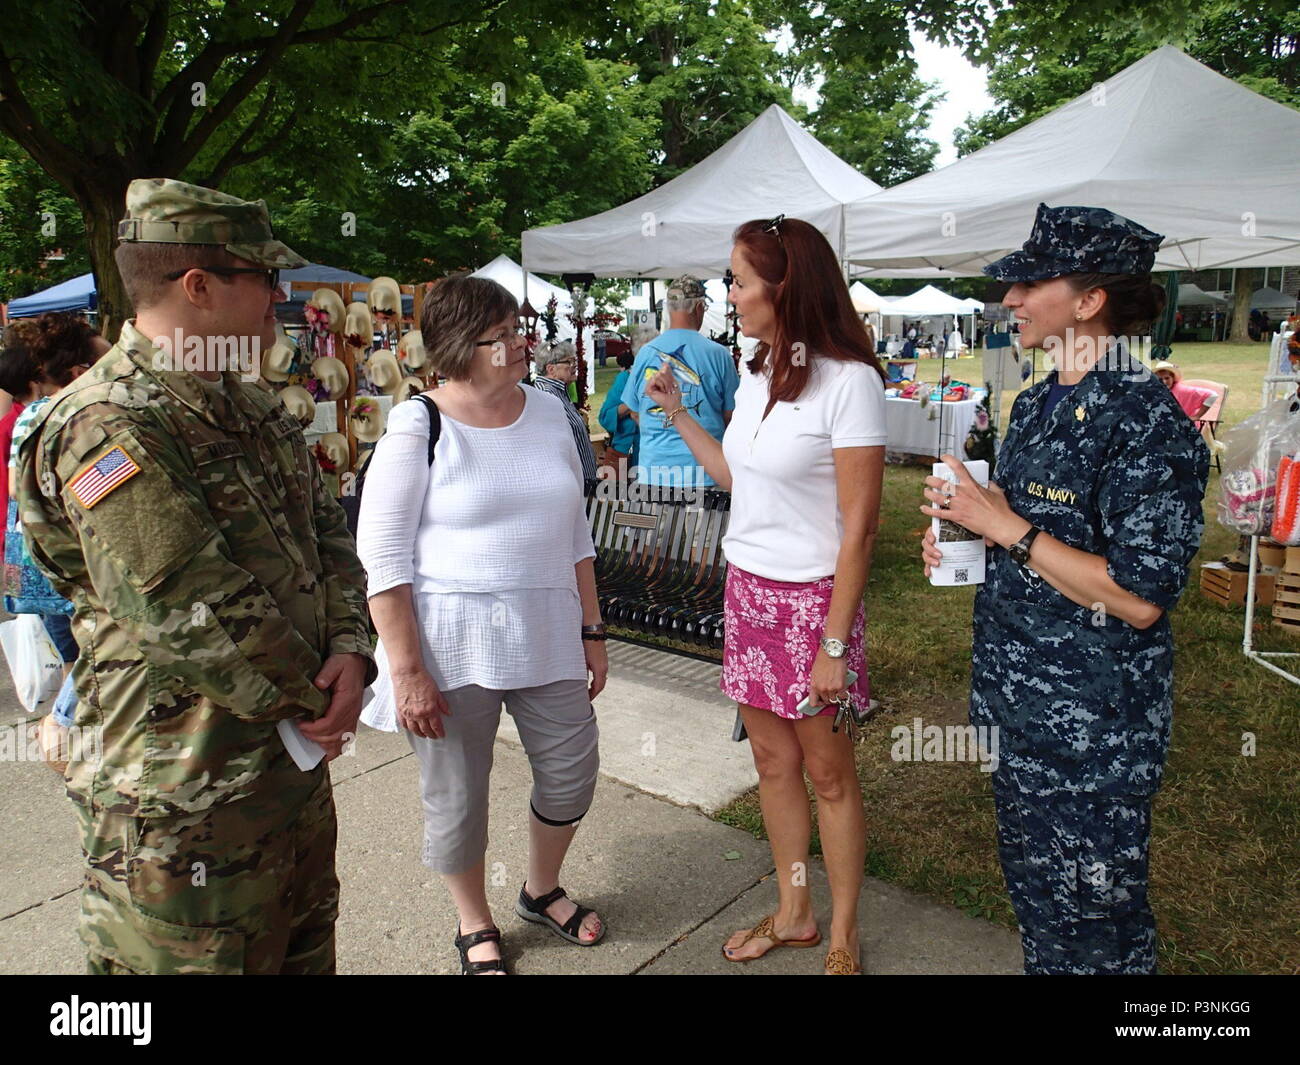 Army Capt. Lucas Marcum, a triage nurse from Company Bravo 48th Combat Support Hospital, and Navy Lt. Cmdr. Cathleen Bruni, a triage nurse from Expeditionary Medical Facility Bethesda speak with Homer Mayor Genevieve Suits and community members about the Healthy Cortland event July 16, 2016.  Healthy Cortland is one of the Innovative Readiness Training events which provides real-world training in a joint civil-military environment while delivering world-class medical care to the people of Cortland, N.Y., from July 15-24. Stock Photo